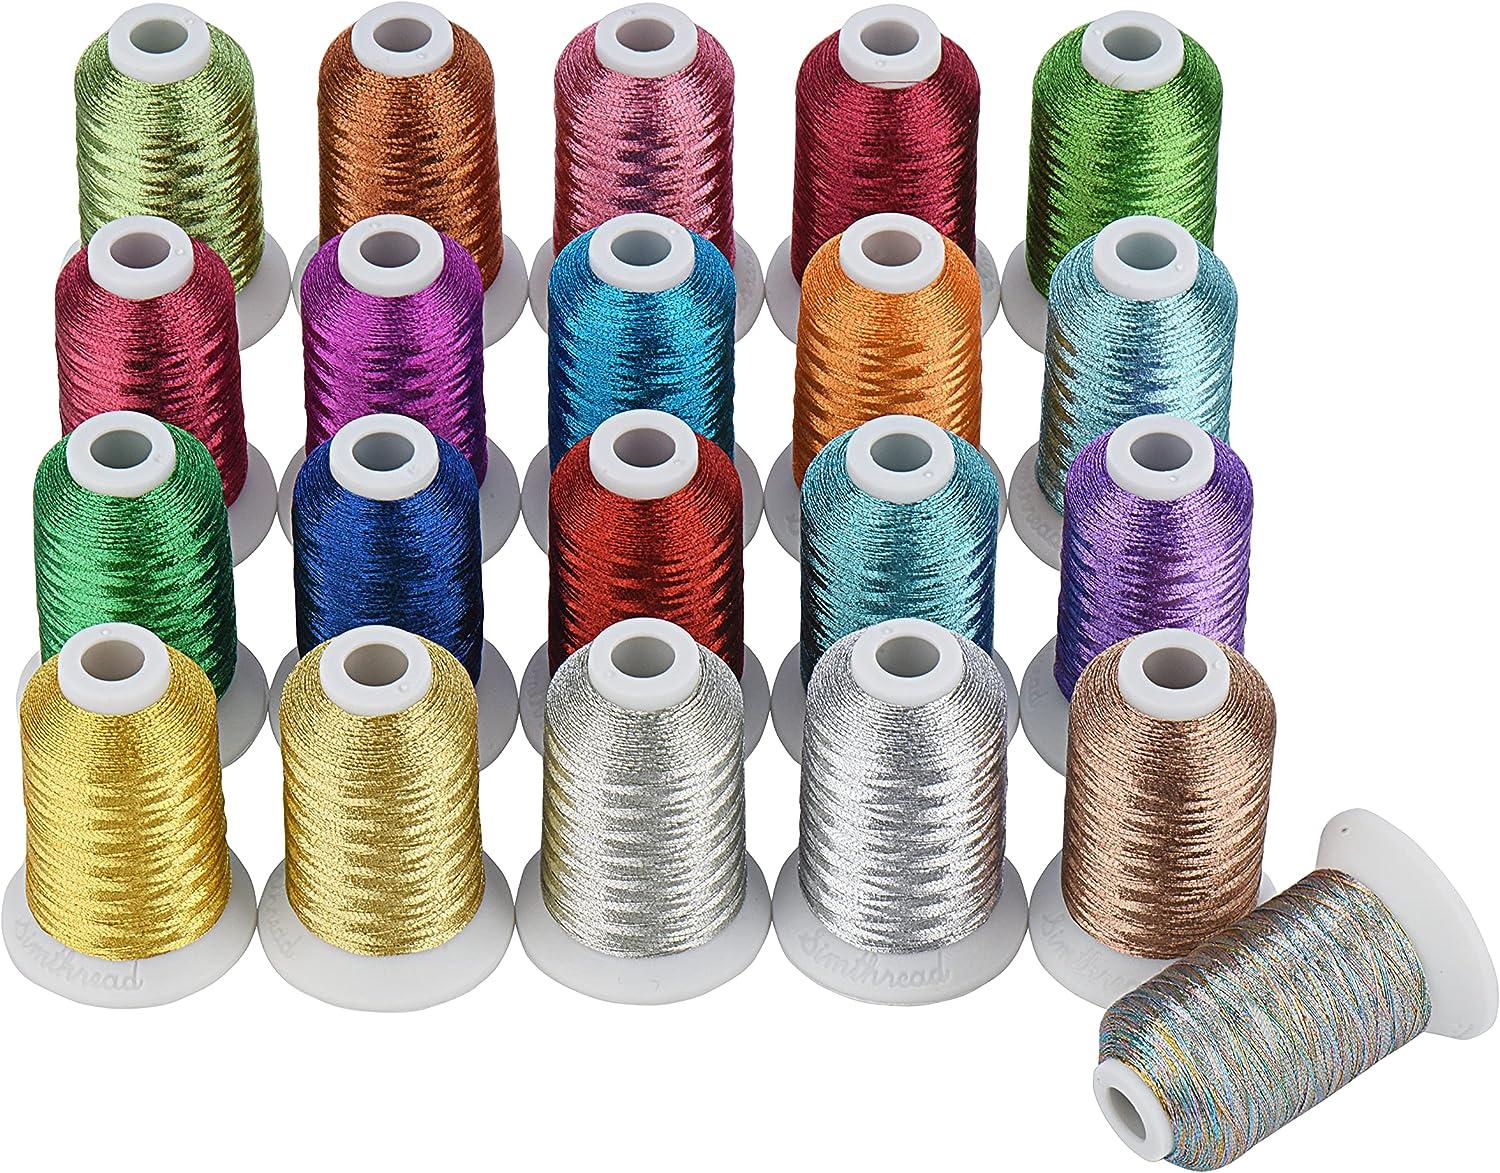 Simthread Embroidery Thread 63 Brother Colors 500 Meters Plastic